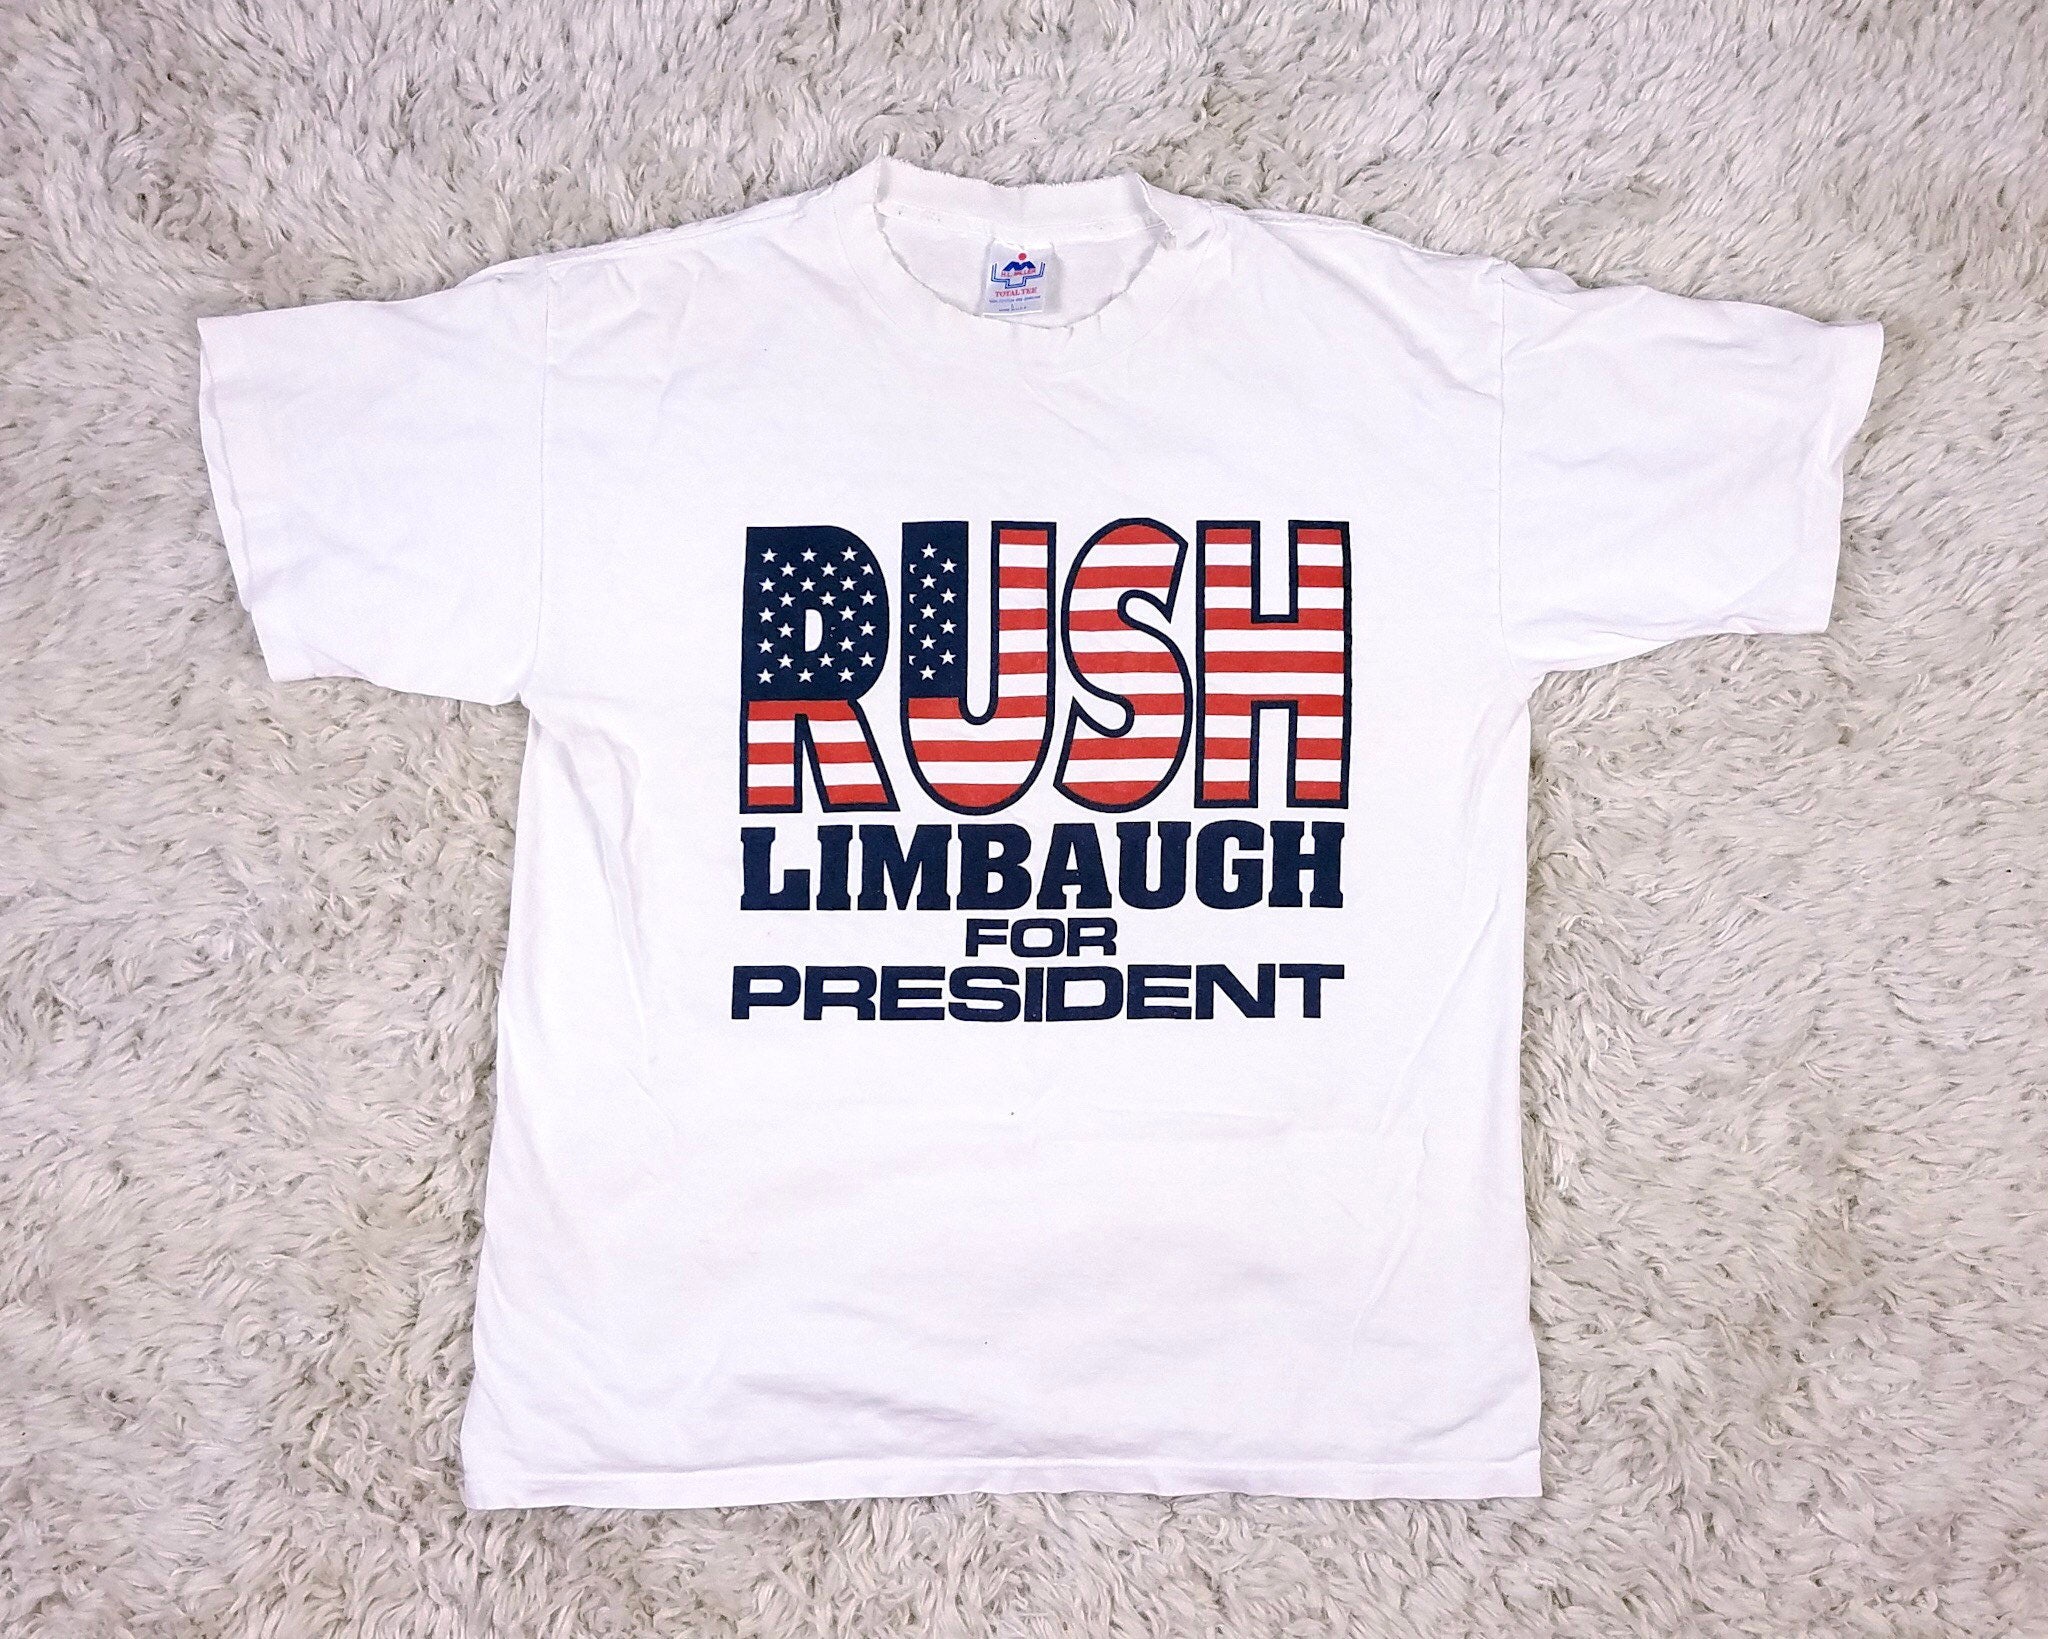 90s Vintage Rush Limbaugh For President Graphic T-Shirt, Novelty Political ...